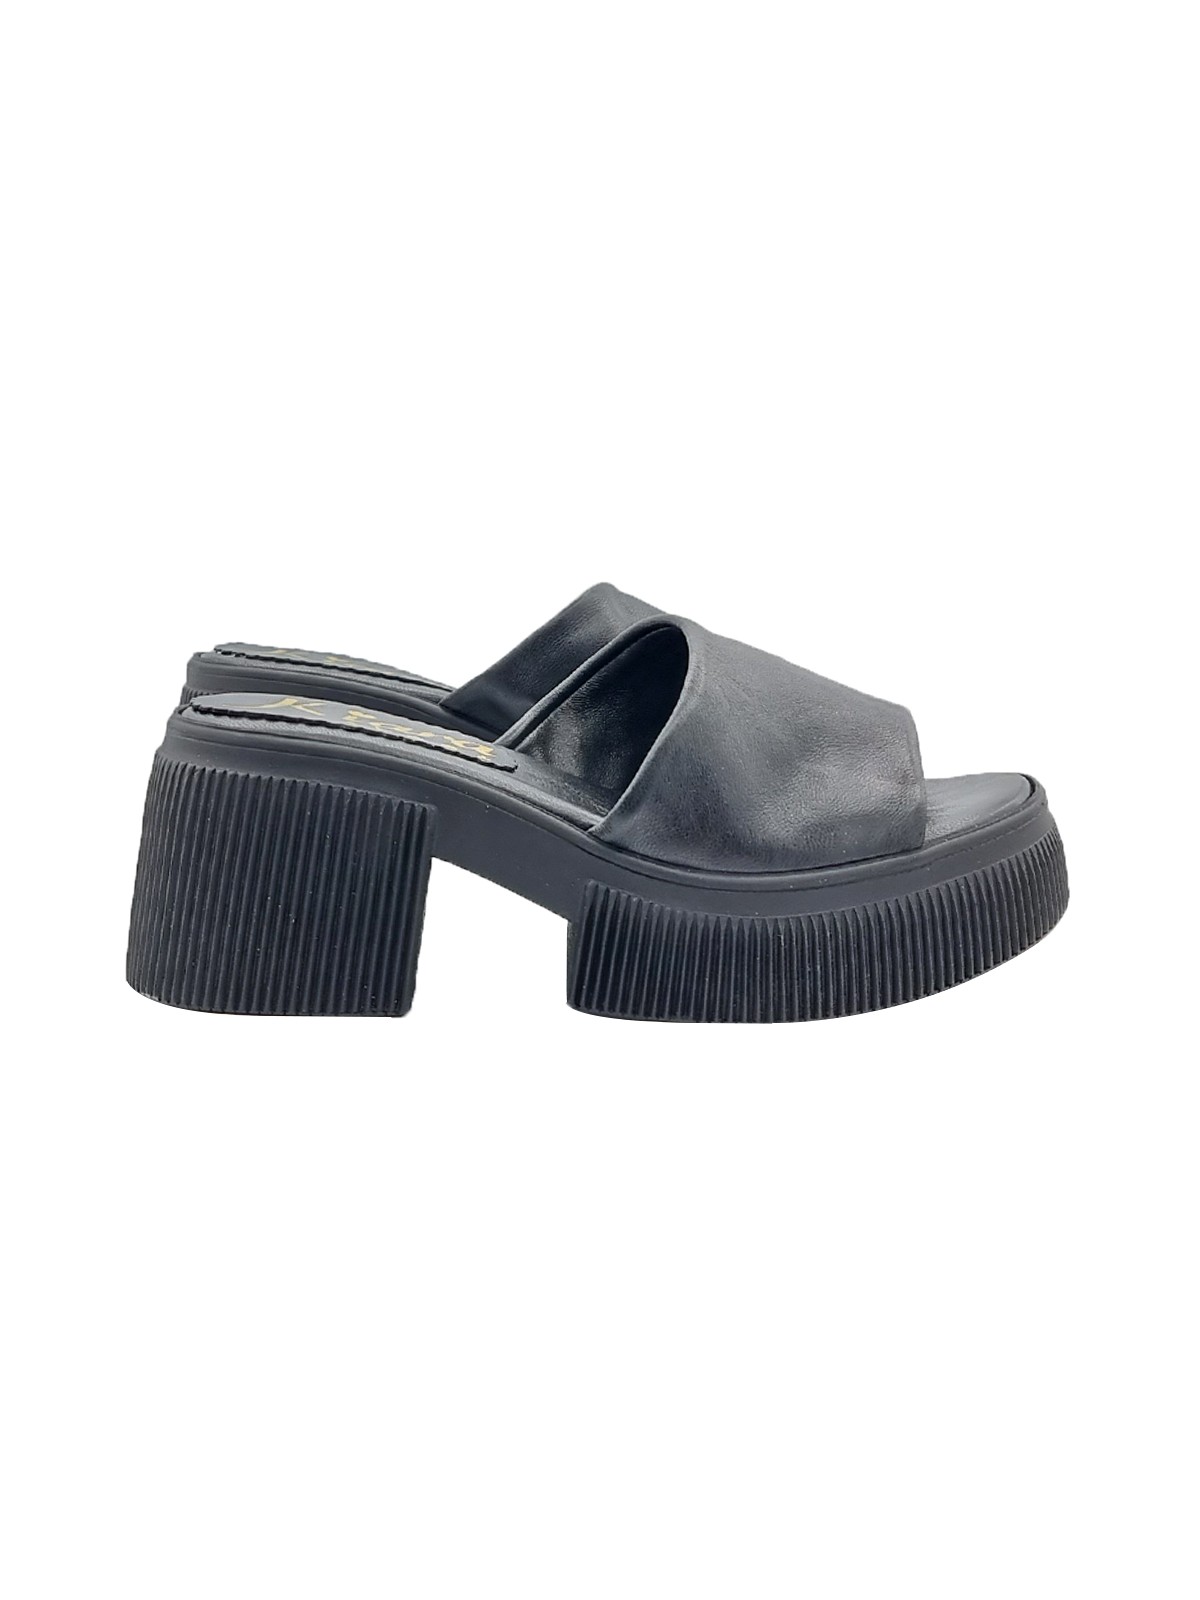 WOMEN'S BLACK LEATHER CLOGS WITH 7 CM HEEL